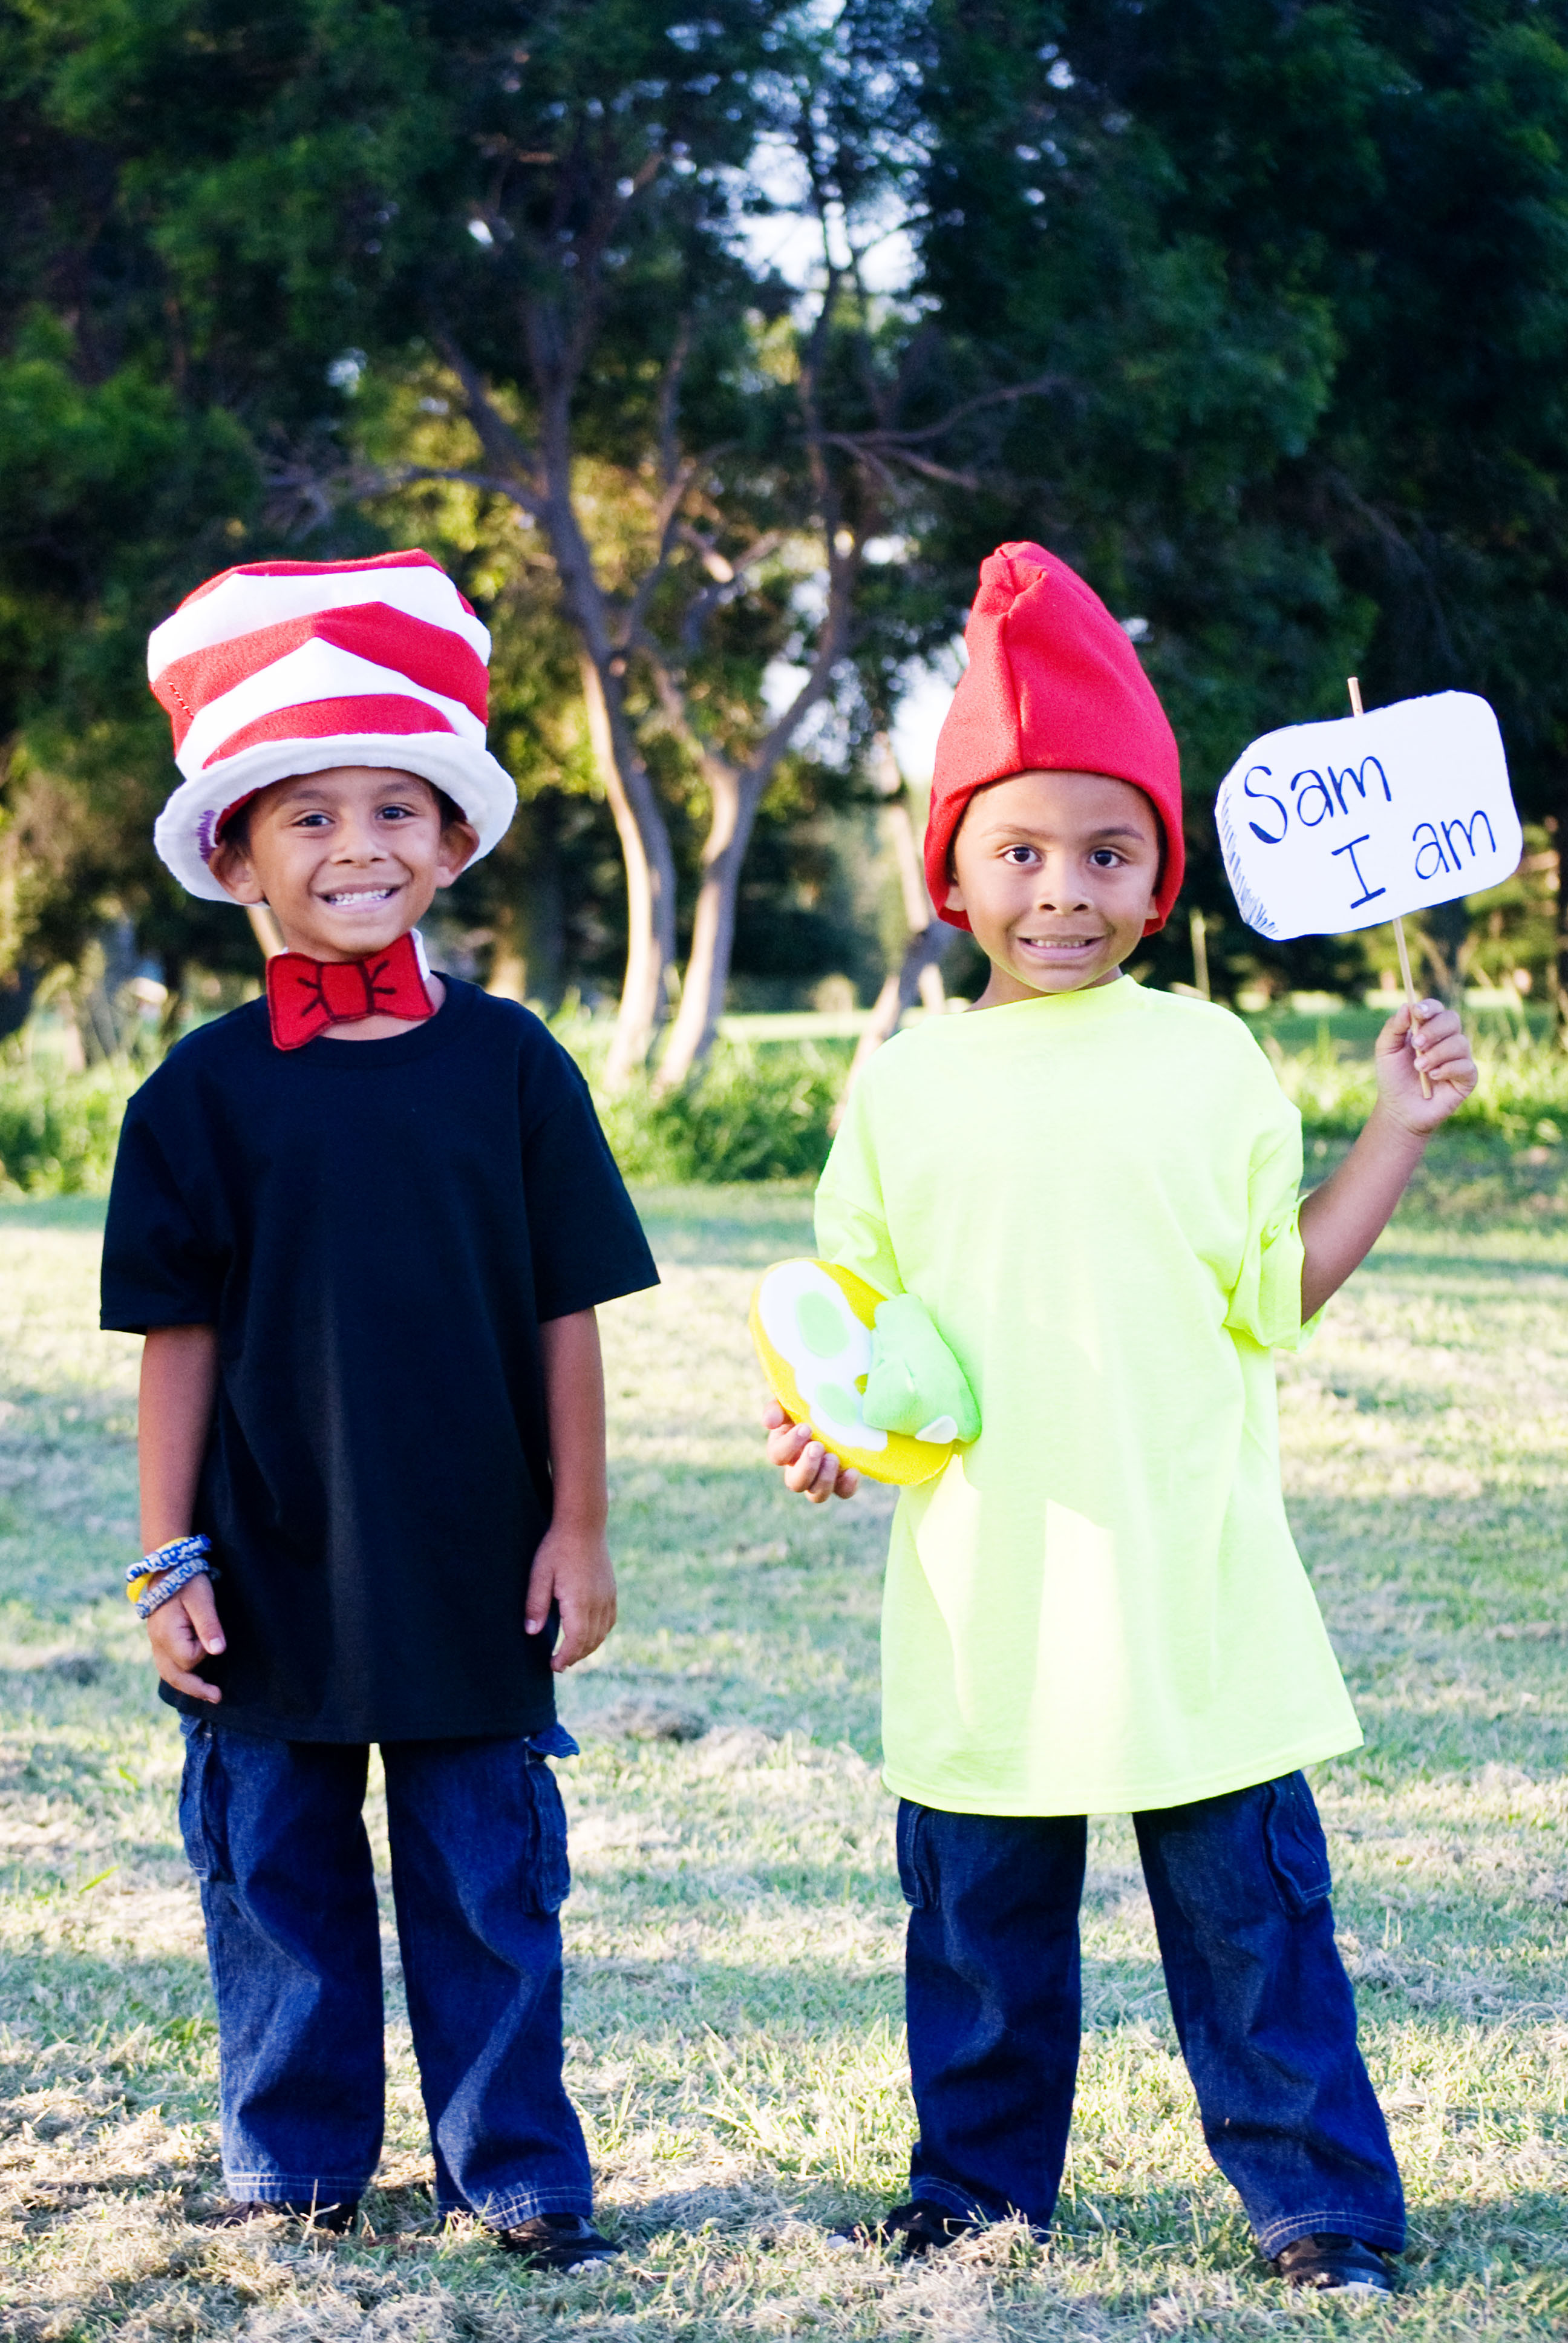 DIY Character Costumes
 Book Character Dress Up Day Easy DIY Dr Seuss Cat In